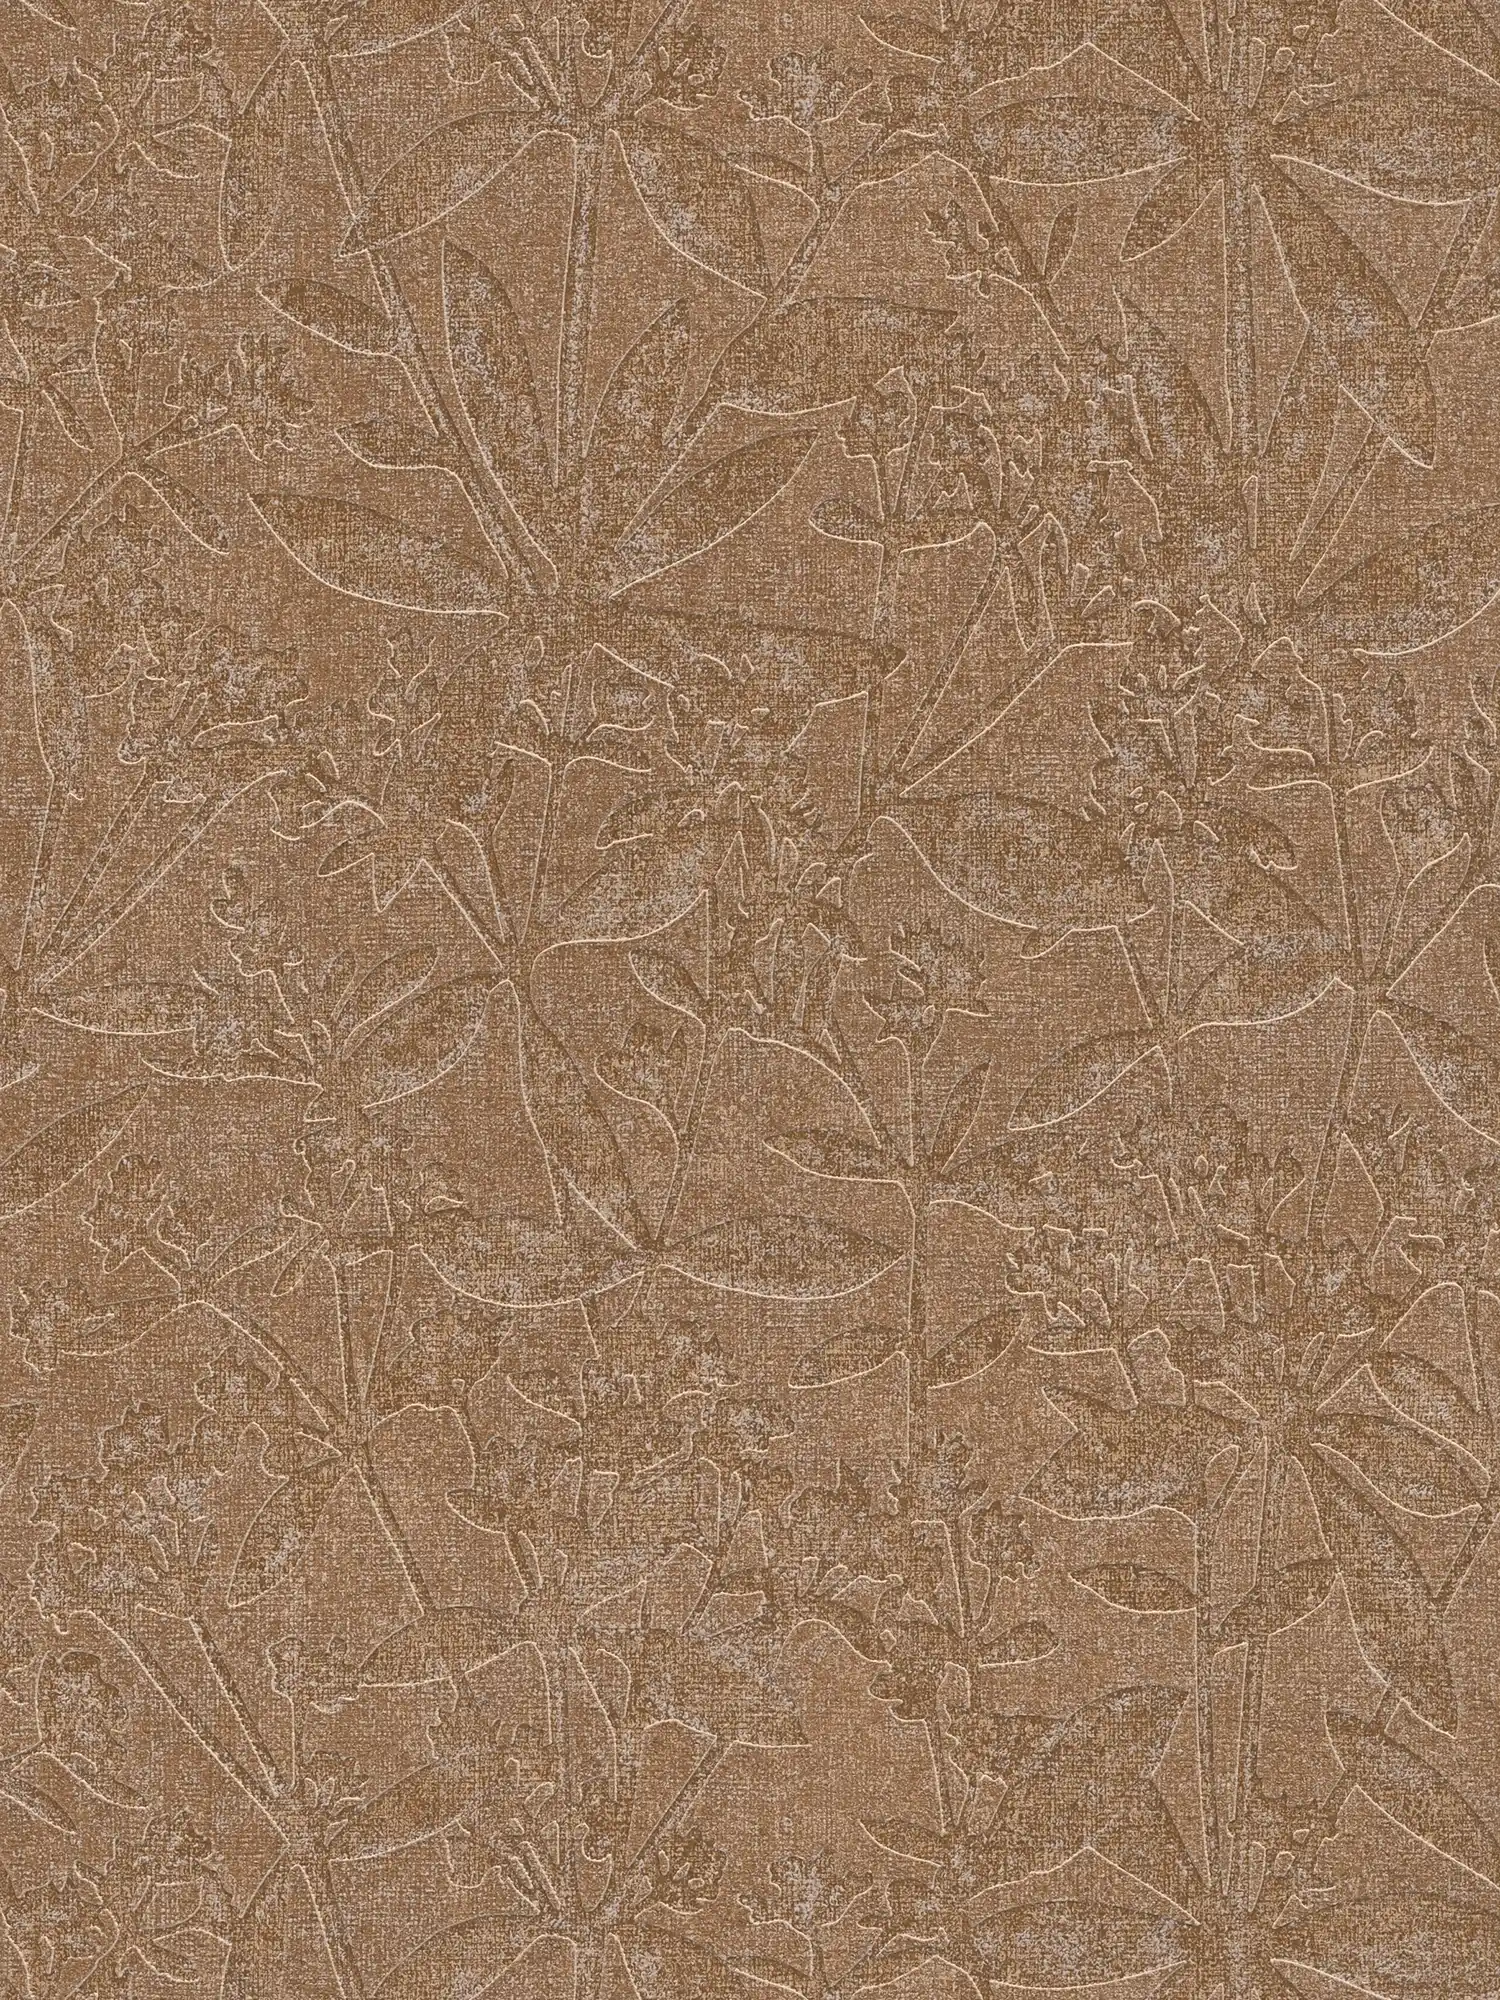 Non-woven wallpaper floral flowers and leaves - brown, beige
